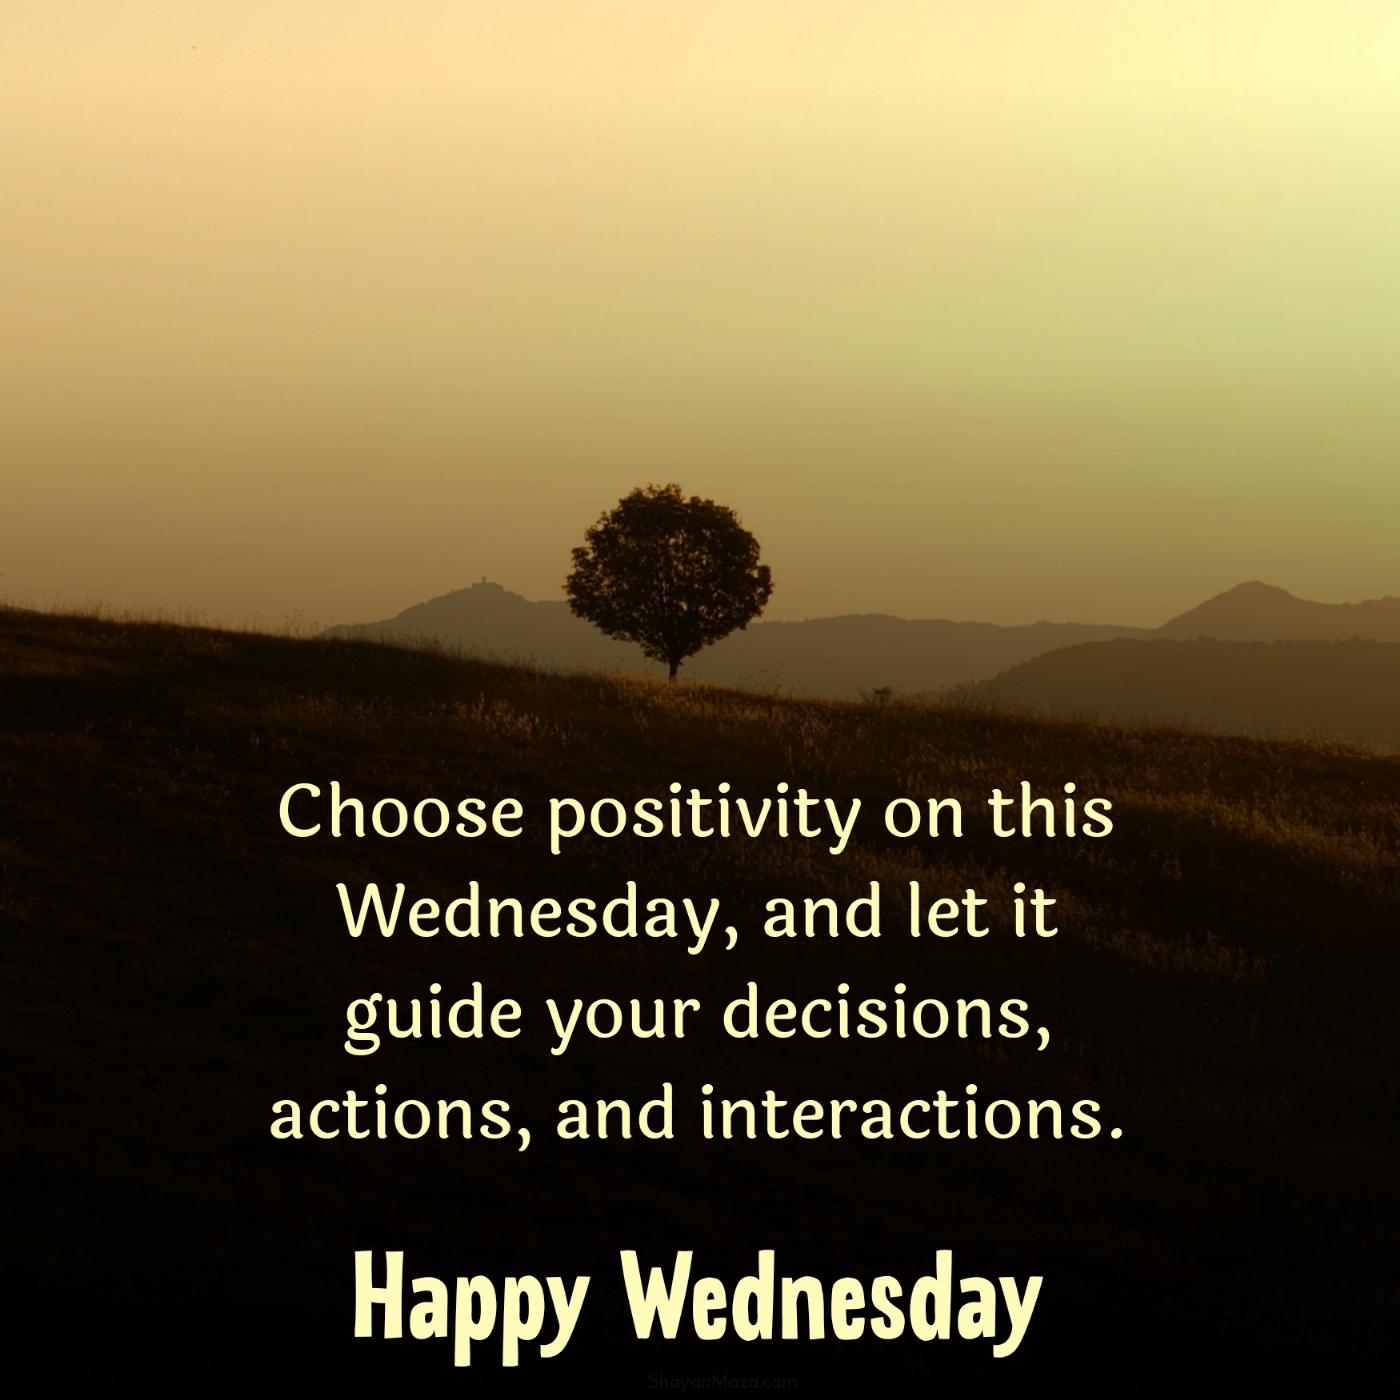 Choose positivity on this Wednesday and let it guide your decisions